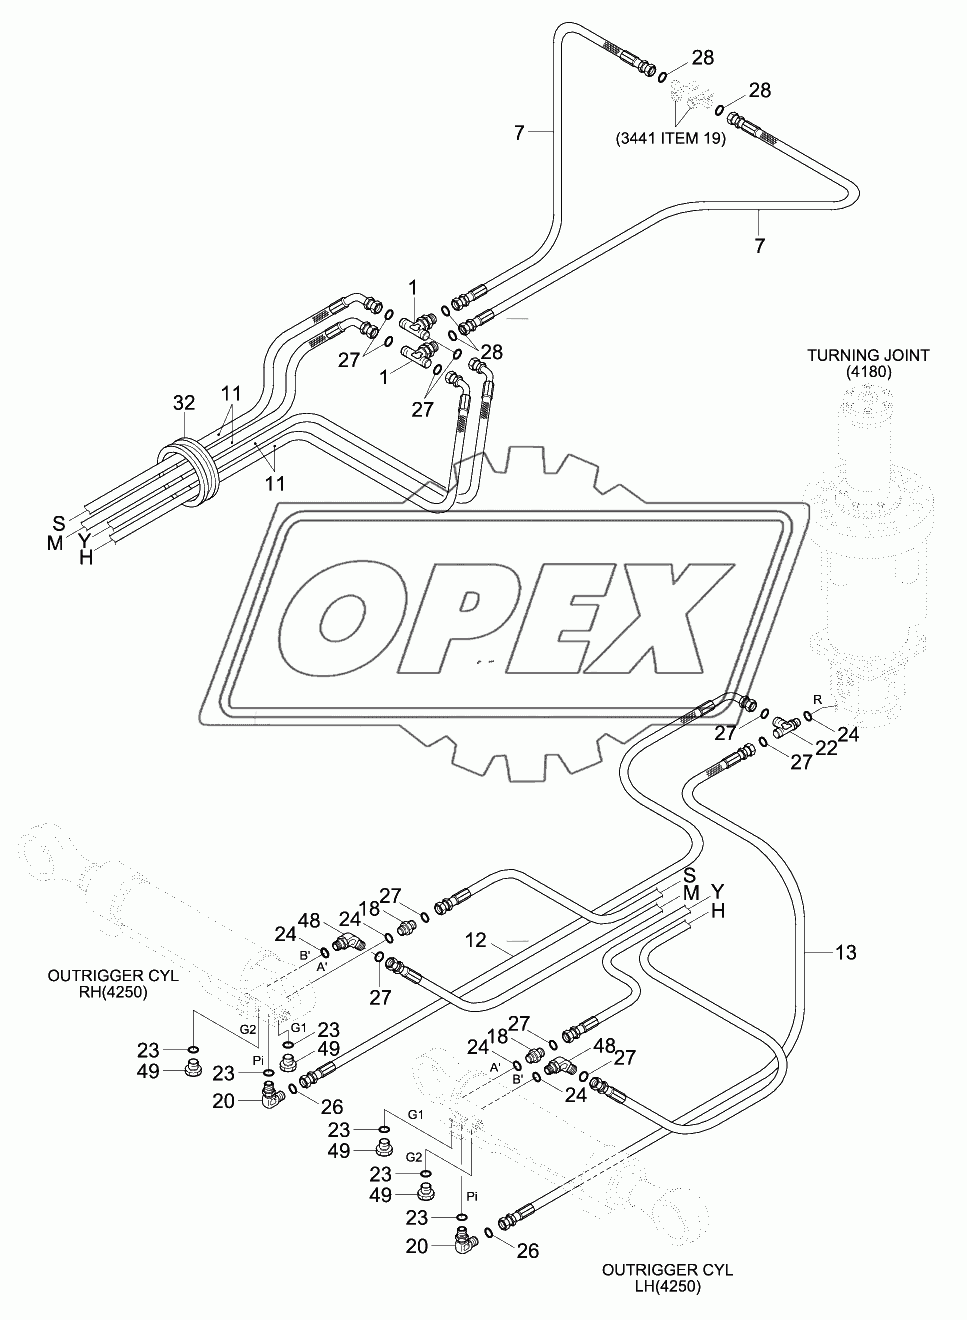 LOWER HYD PIPING 2 (F/OUT, R/BLD, #0067-)